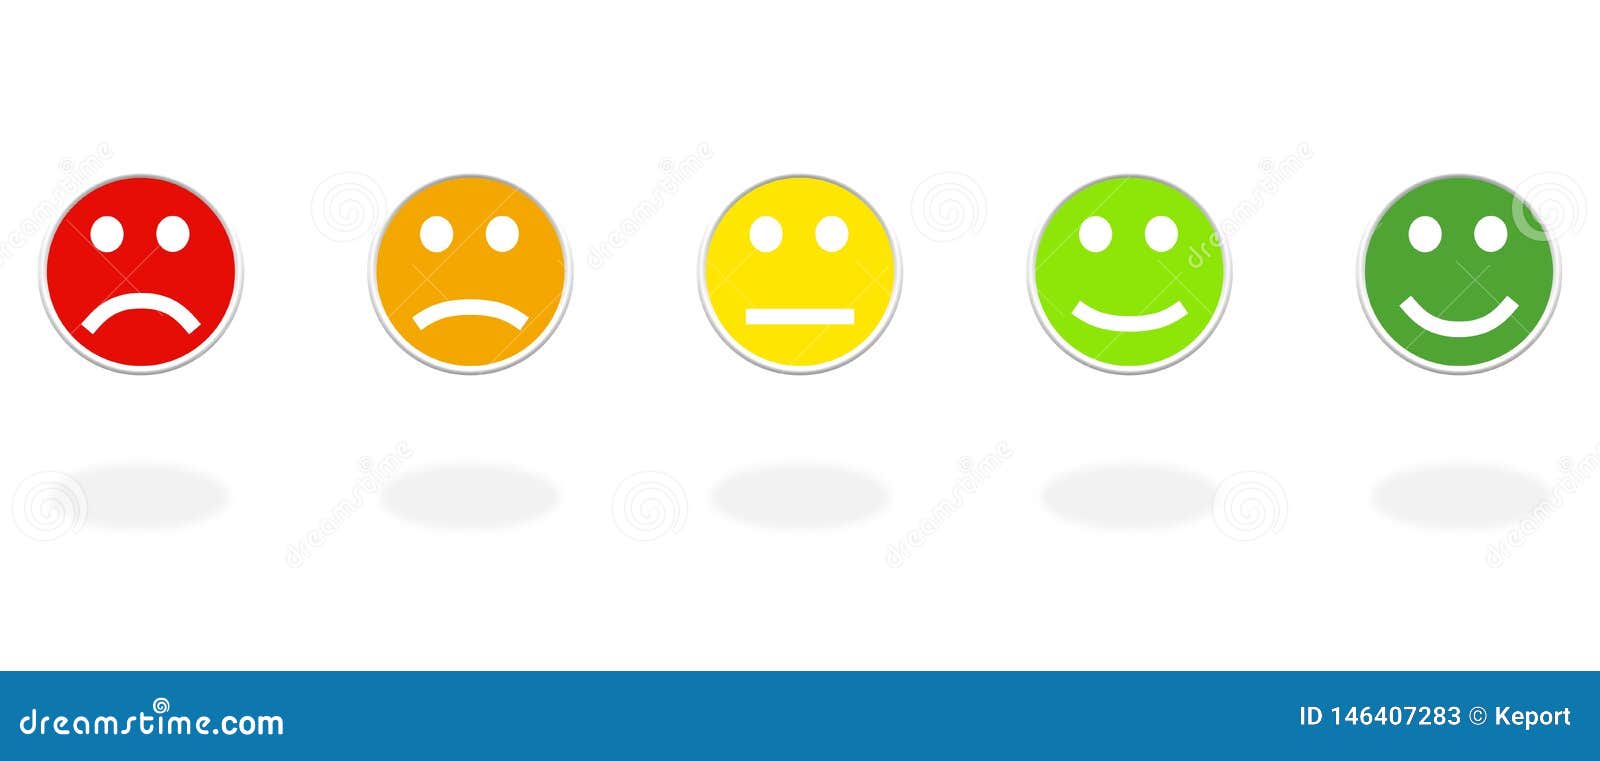 5 Round Feedback Icons with 5 Colors Stock Illustration - Illustration ...